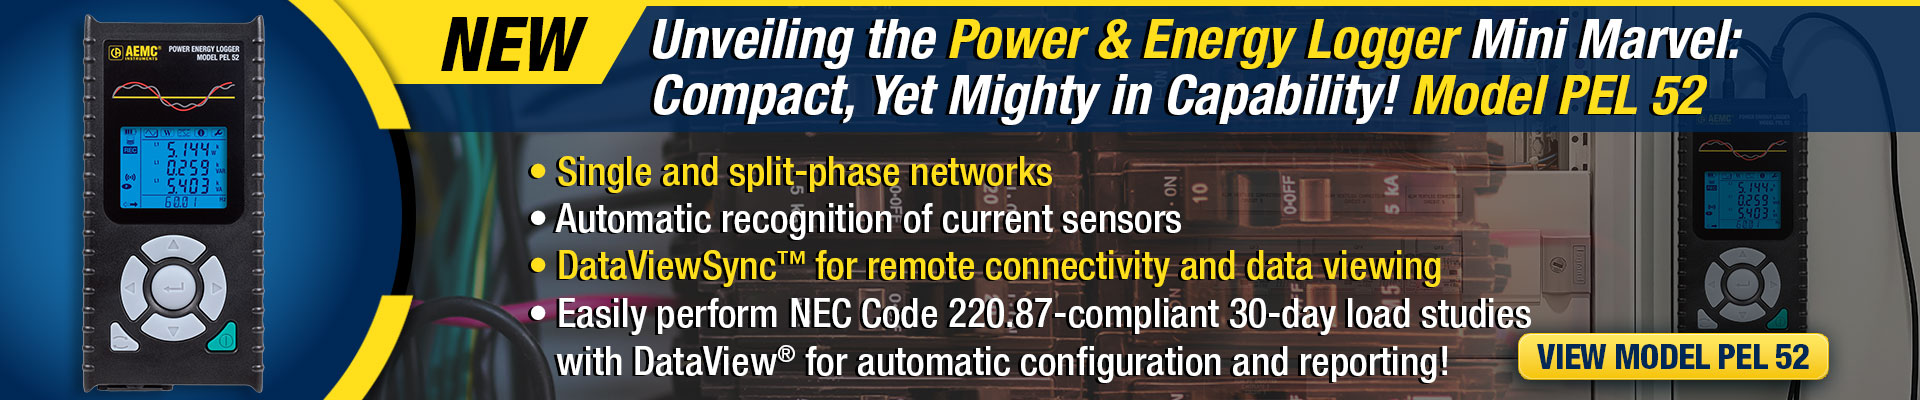 Announcing our latest Compact but Powerful Power and Energy Logger - PEL 52!